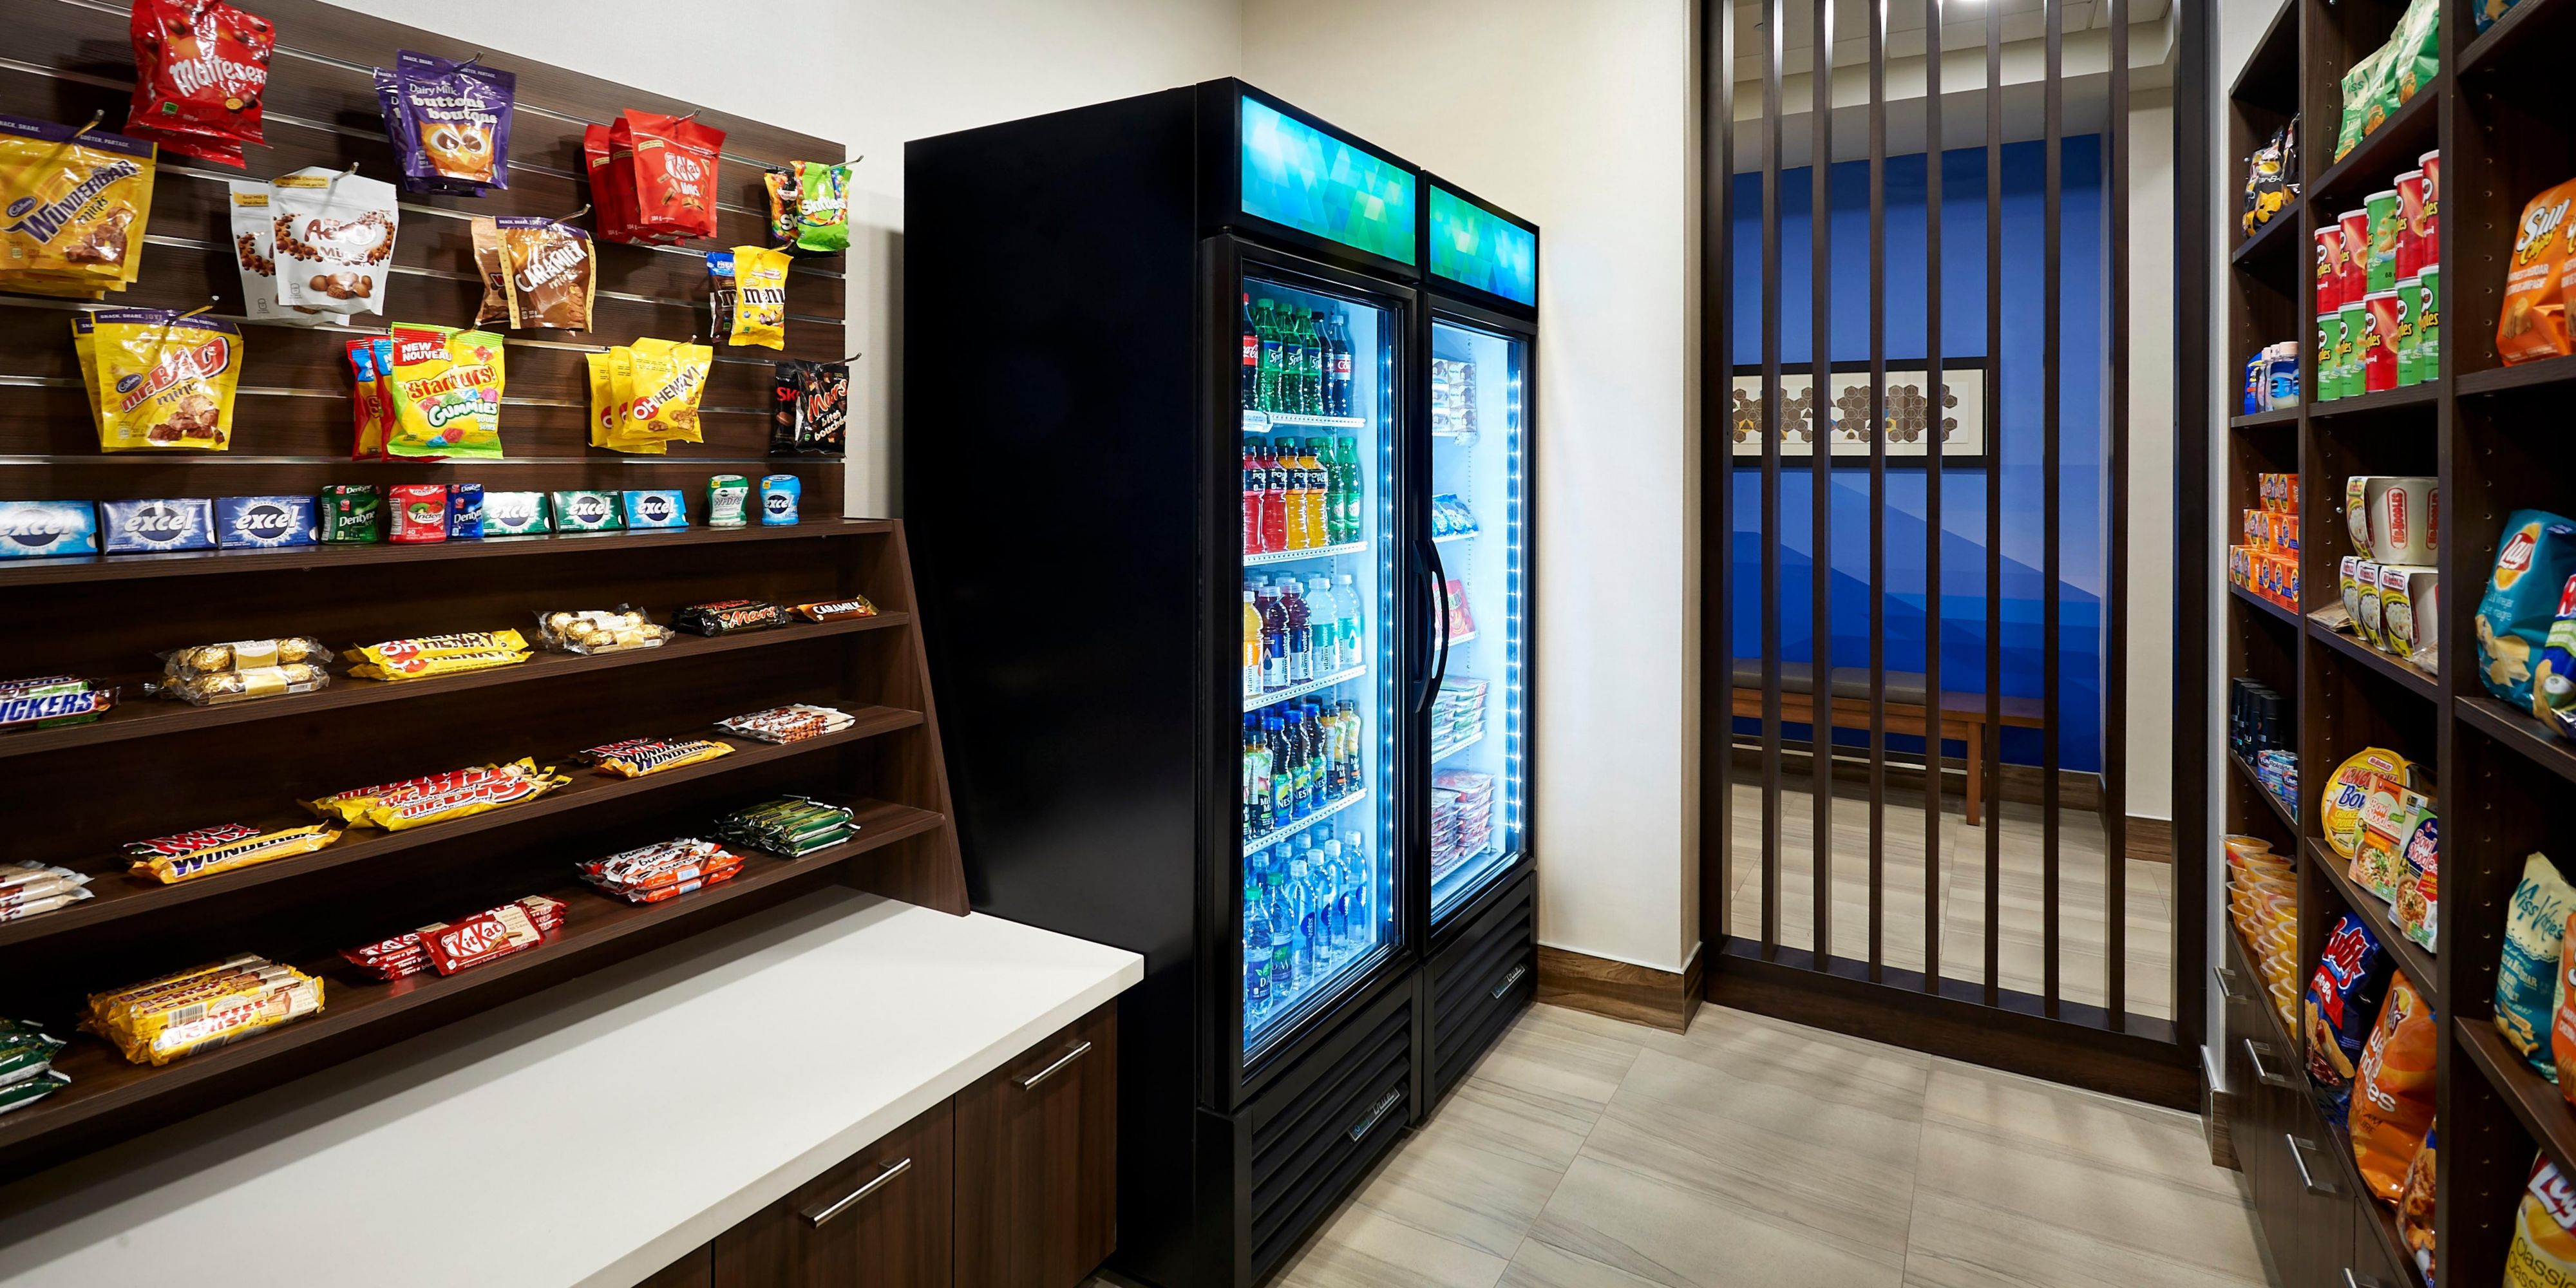 Visit our suite shop located next to the front desk in the lobby of the hotel. We may have the salty or sweet snack you are looking for. Find an array of chocolate, chips, candy, drinks, ice cream & more! Any questions? Please contact us.